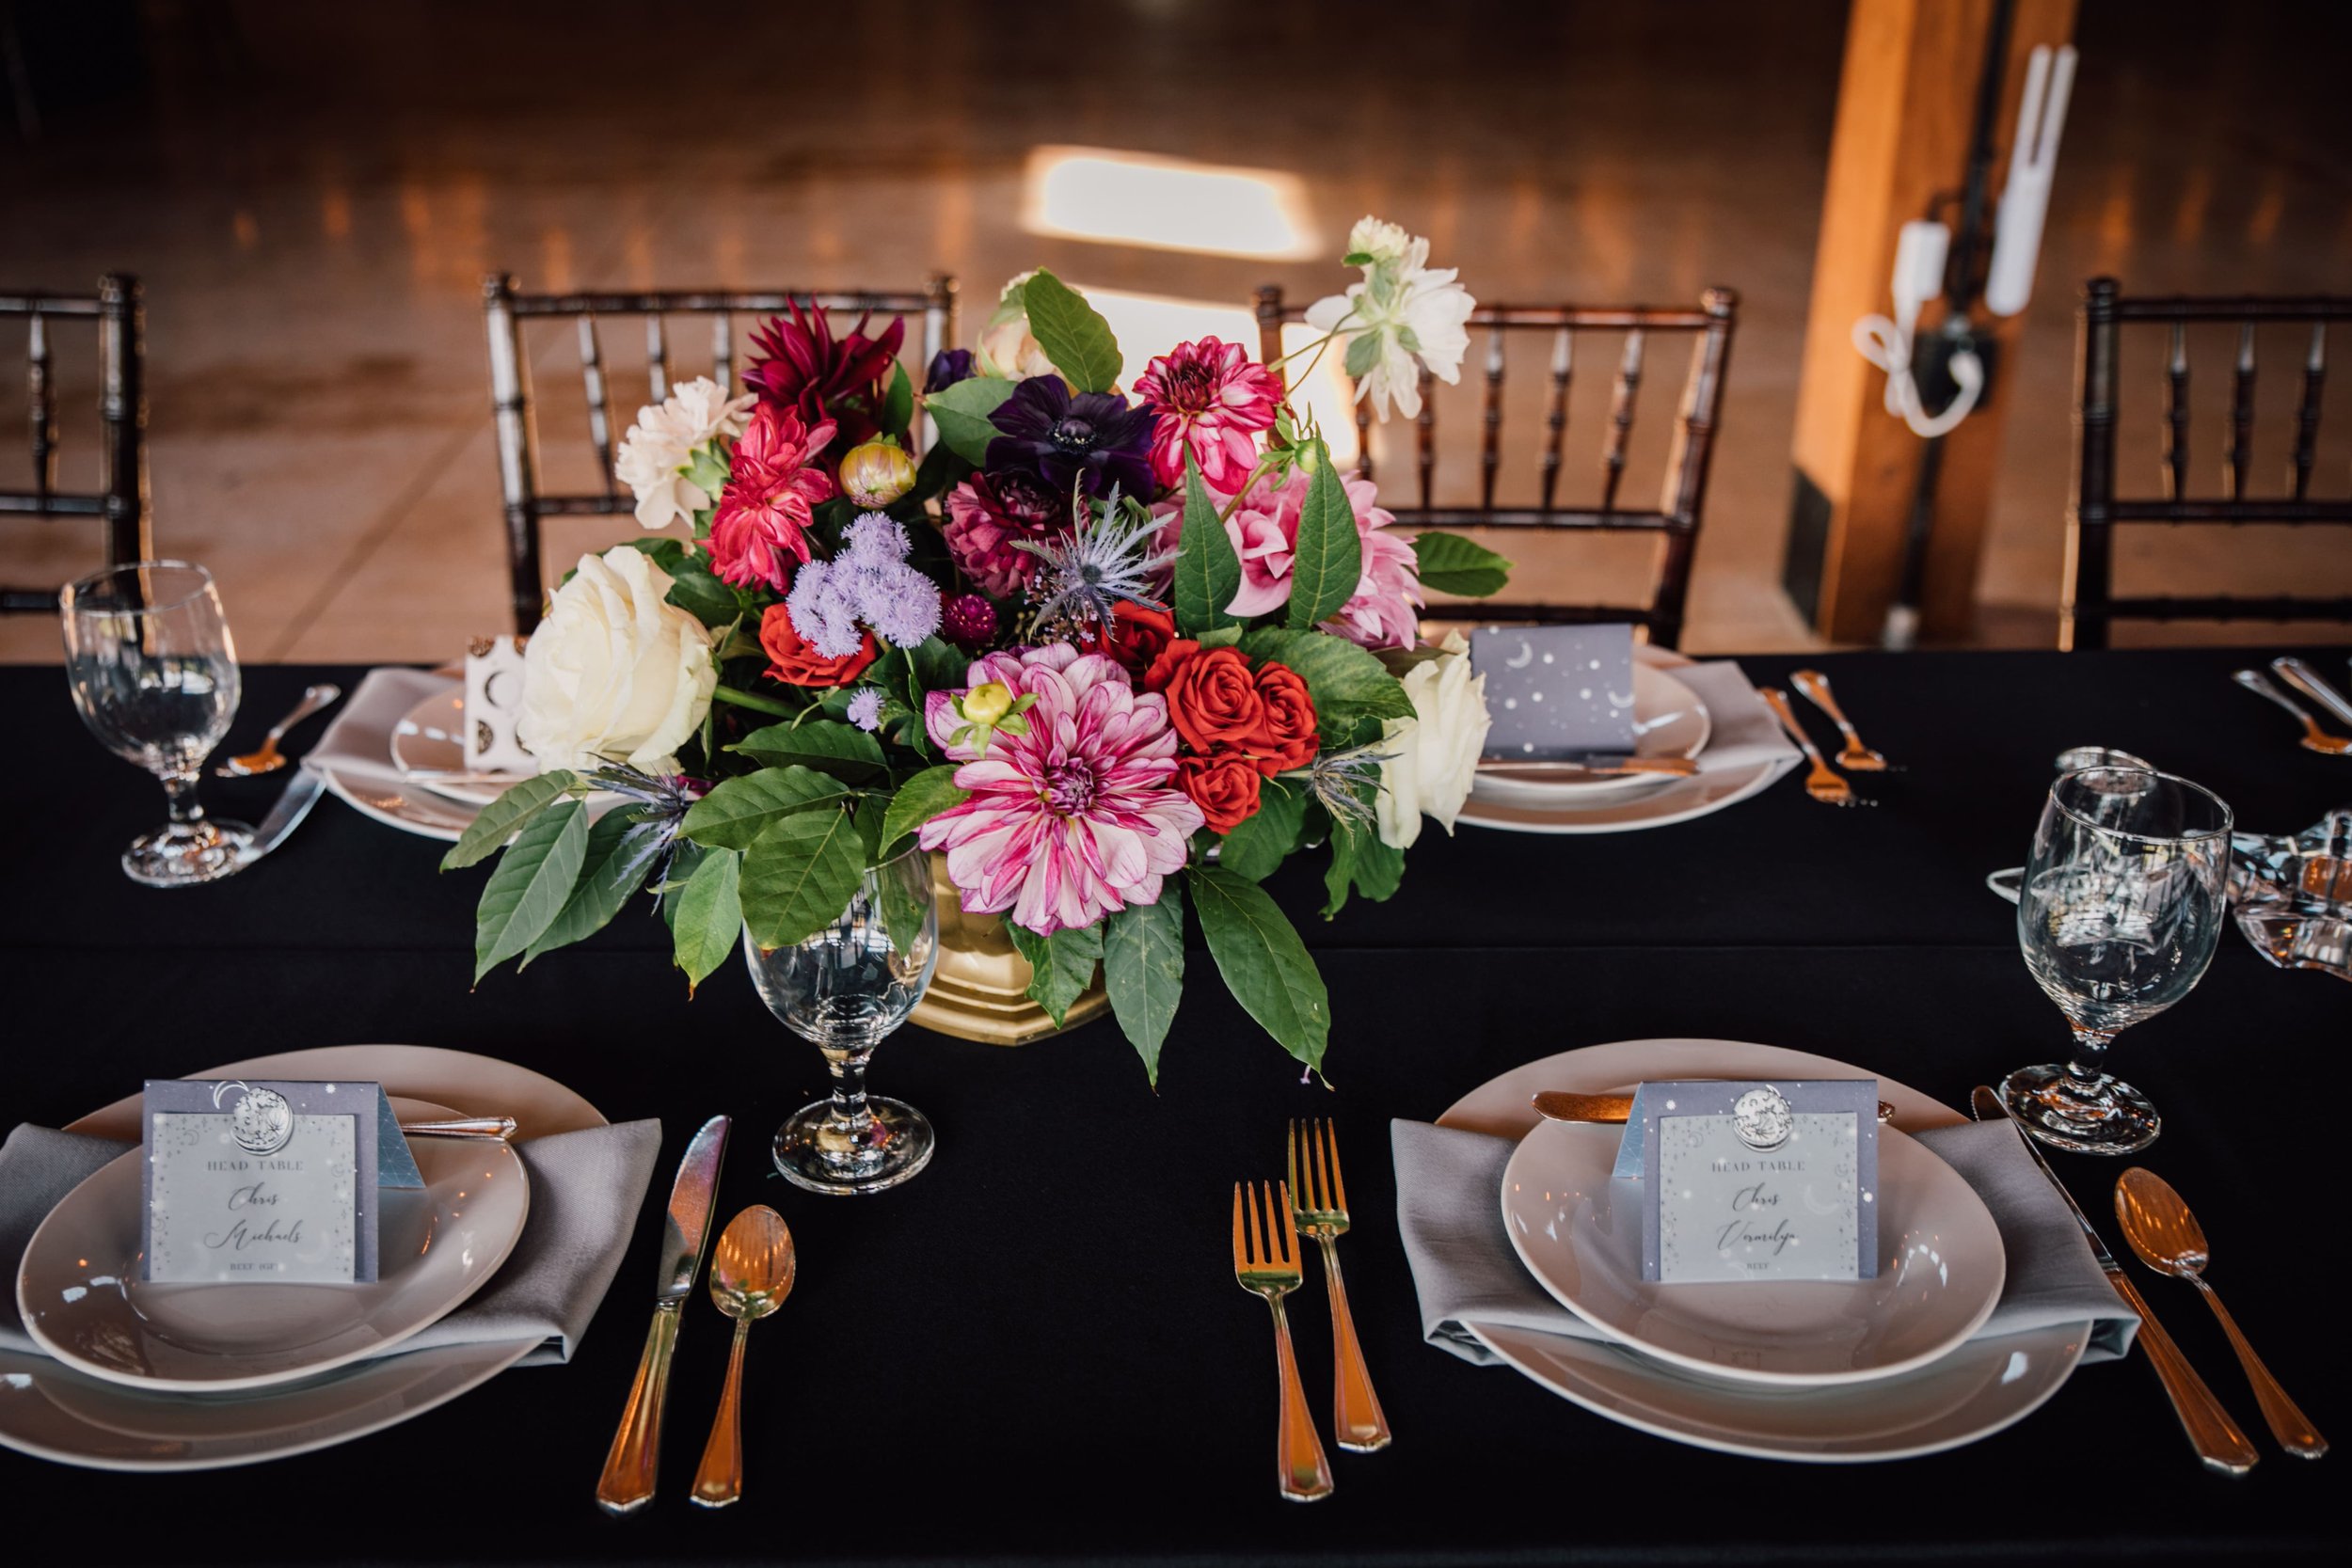  table centerpiece from a space wedding reception table with black tablecloth 